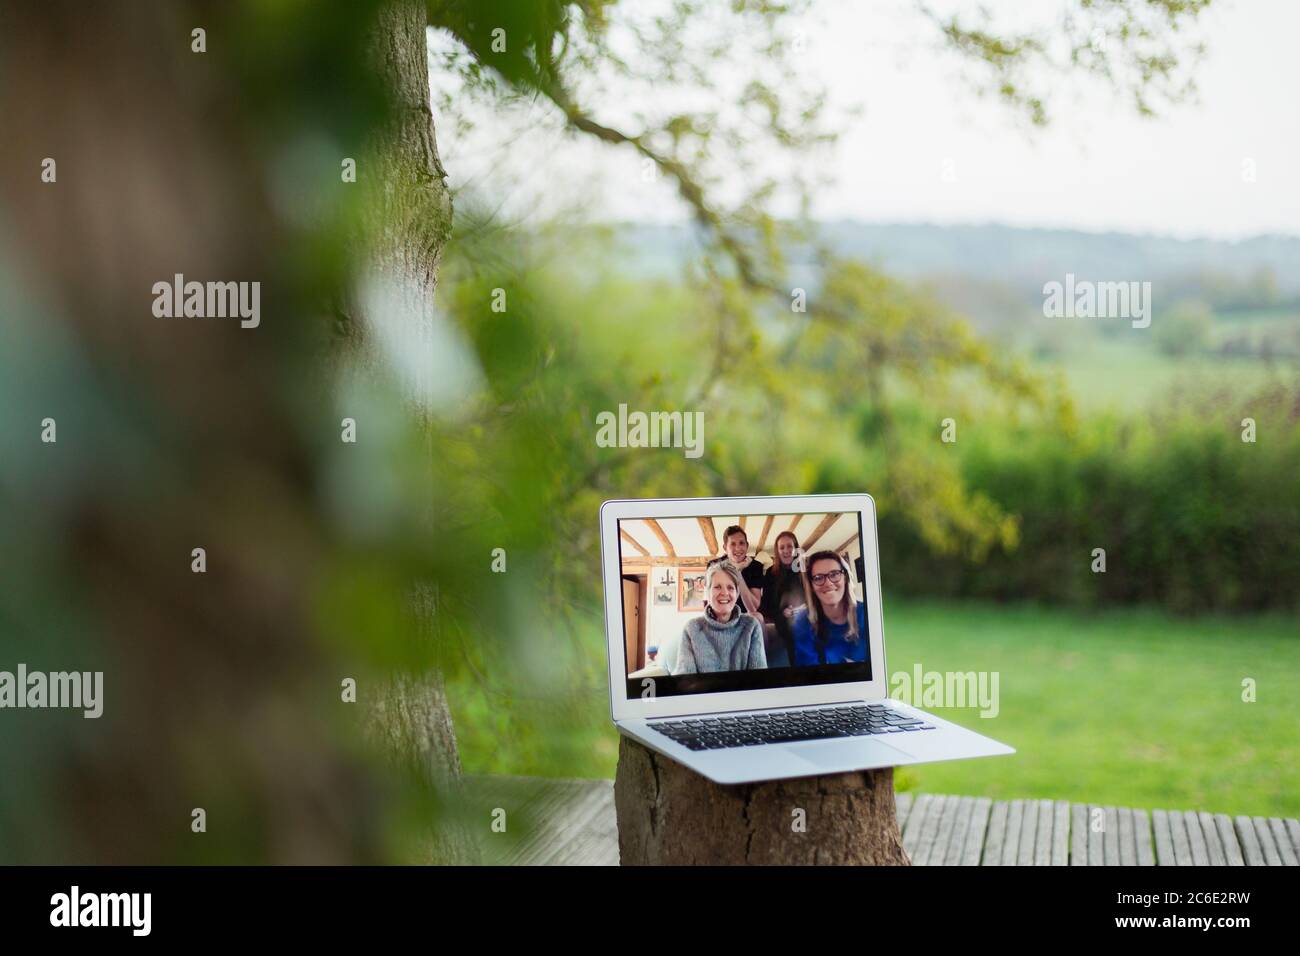 Family video chatting on laptop screen on balcony Stock Photo